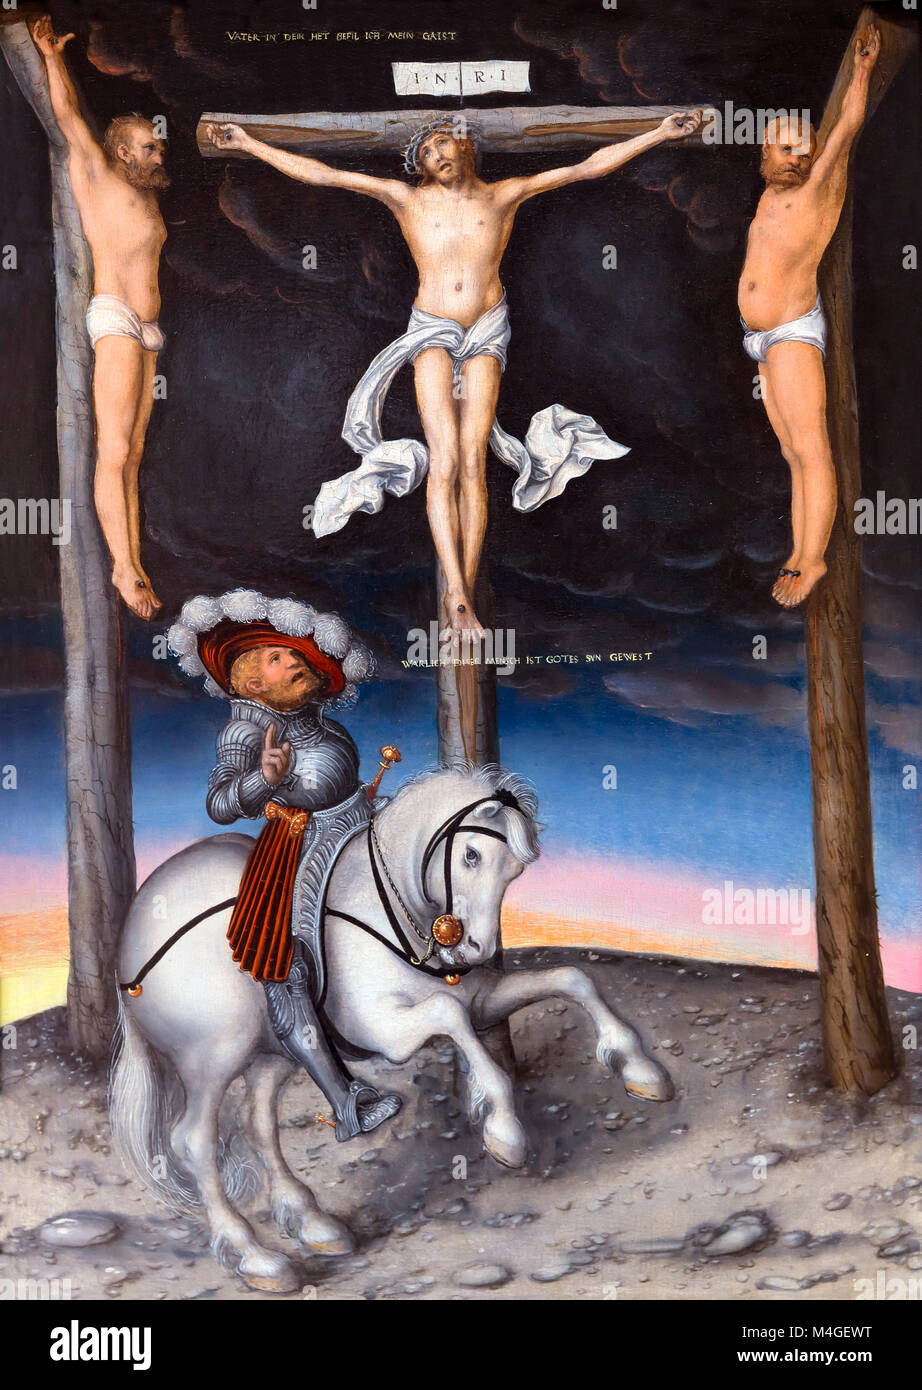 The Crucifixion with the Converted Centurion, Lucas Cranach the Elder, 1536, National Gallery of Art, Washington DC, USA, North America Stock Photo